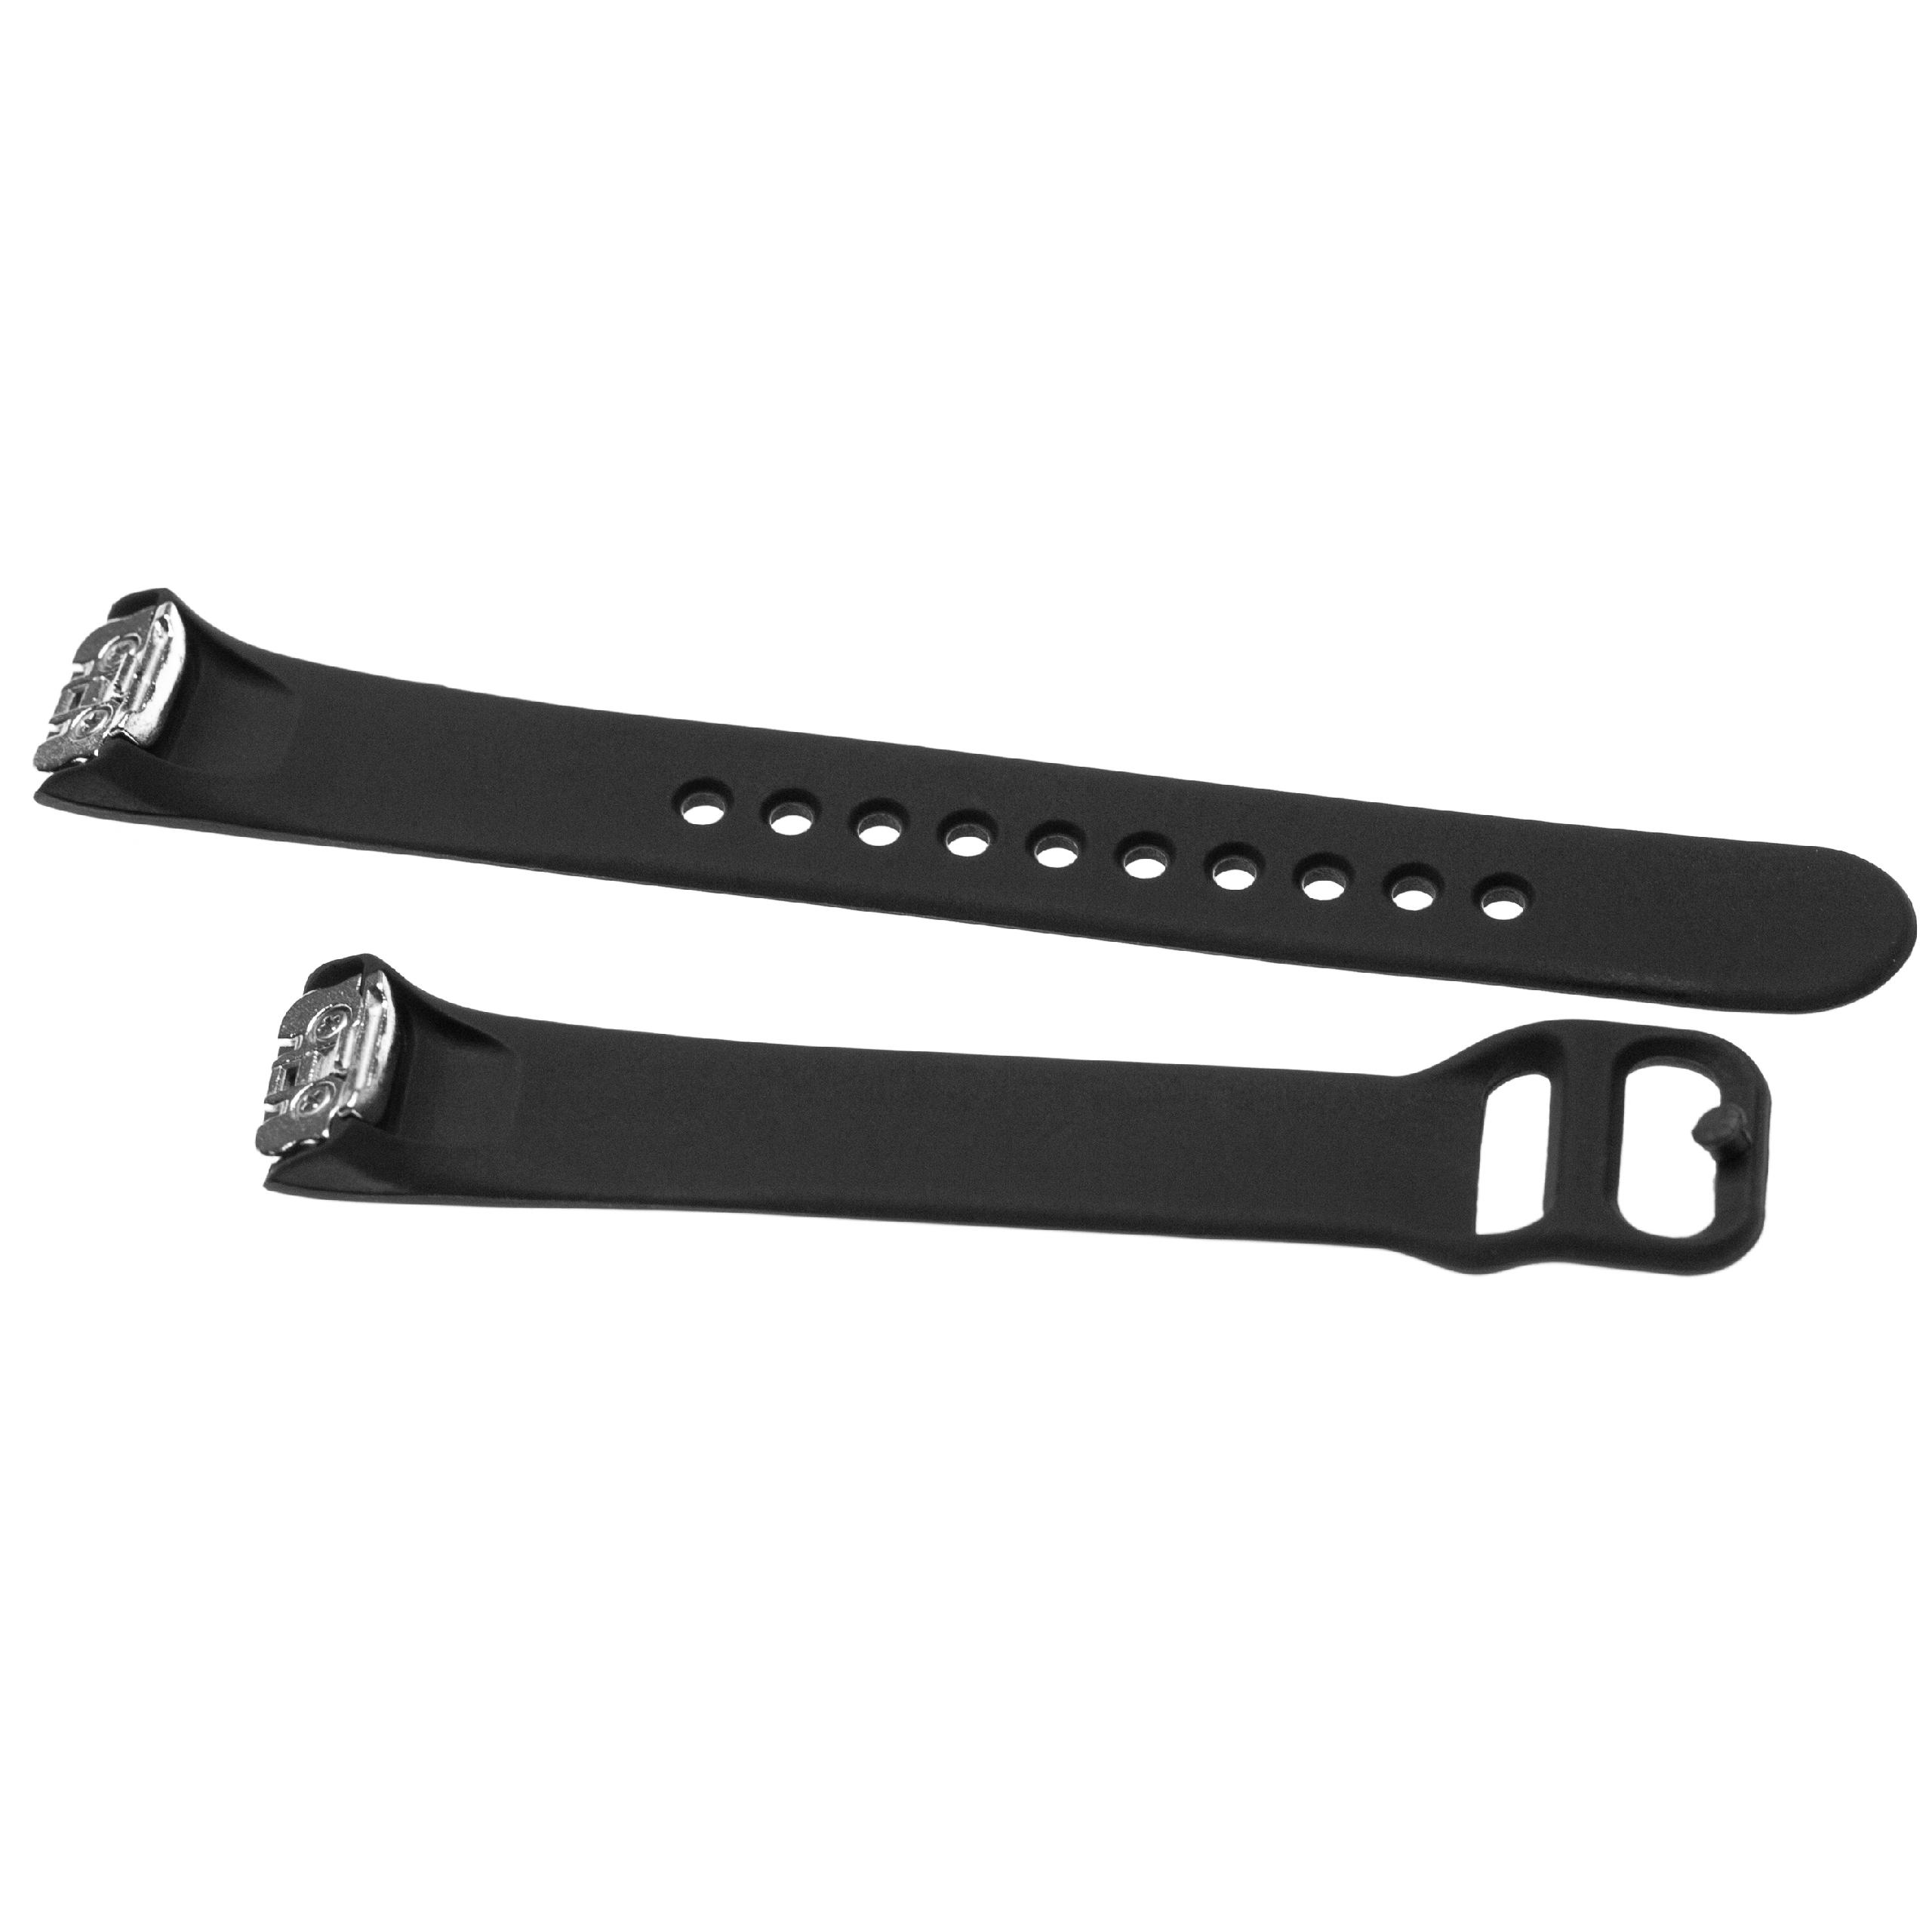 wristband for Samsung Galaxy Fit Smartwatch - 11.5 + 8.9 cm long, 17mm wide, silicone, black